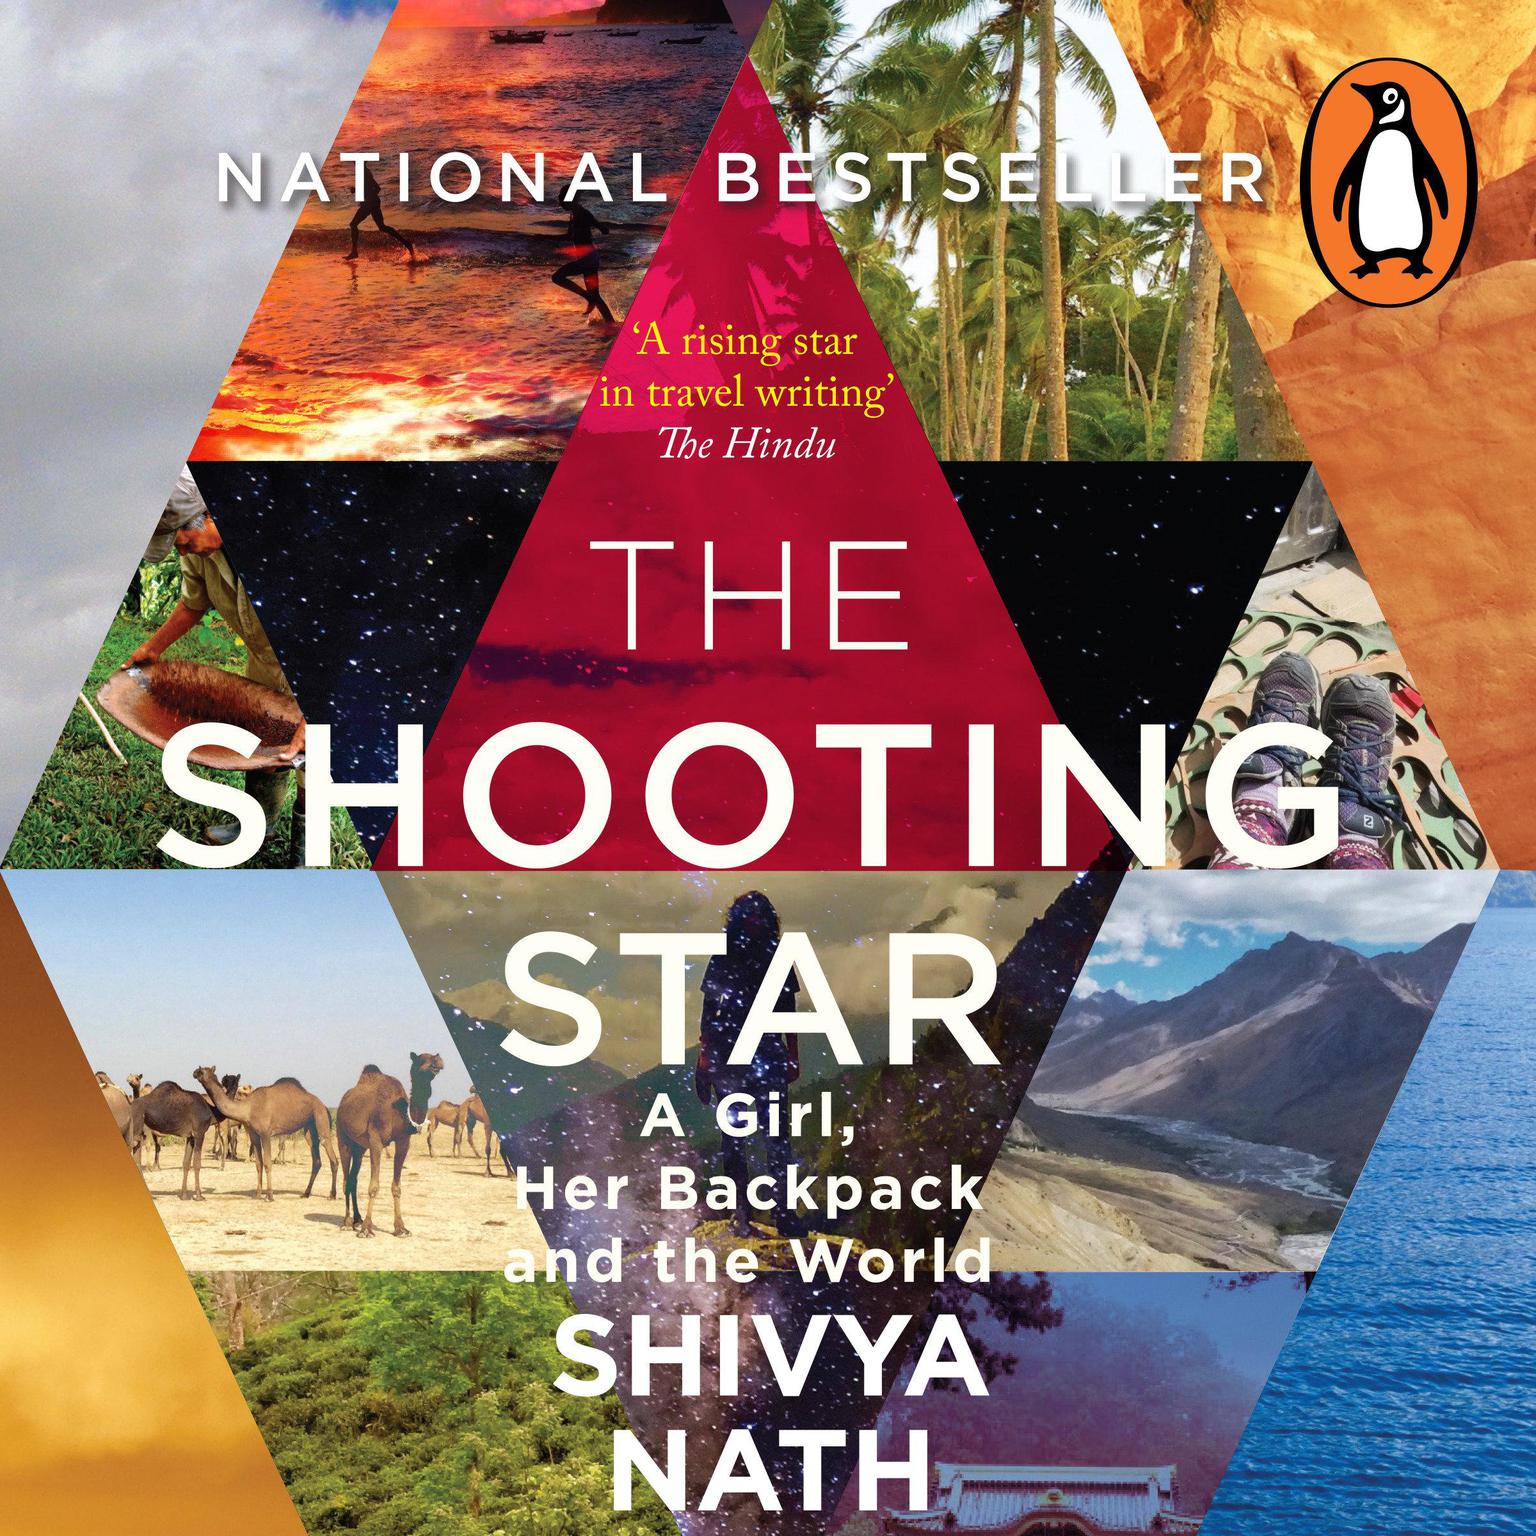 The Shooting Star: A Girl, Her Backpack and the World Audiobook, by Shivya Nath